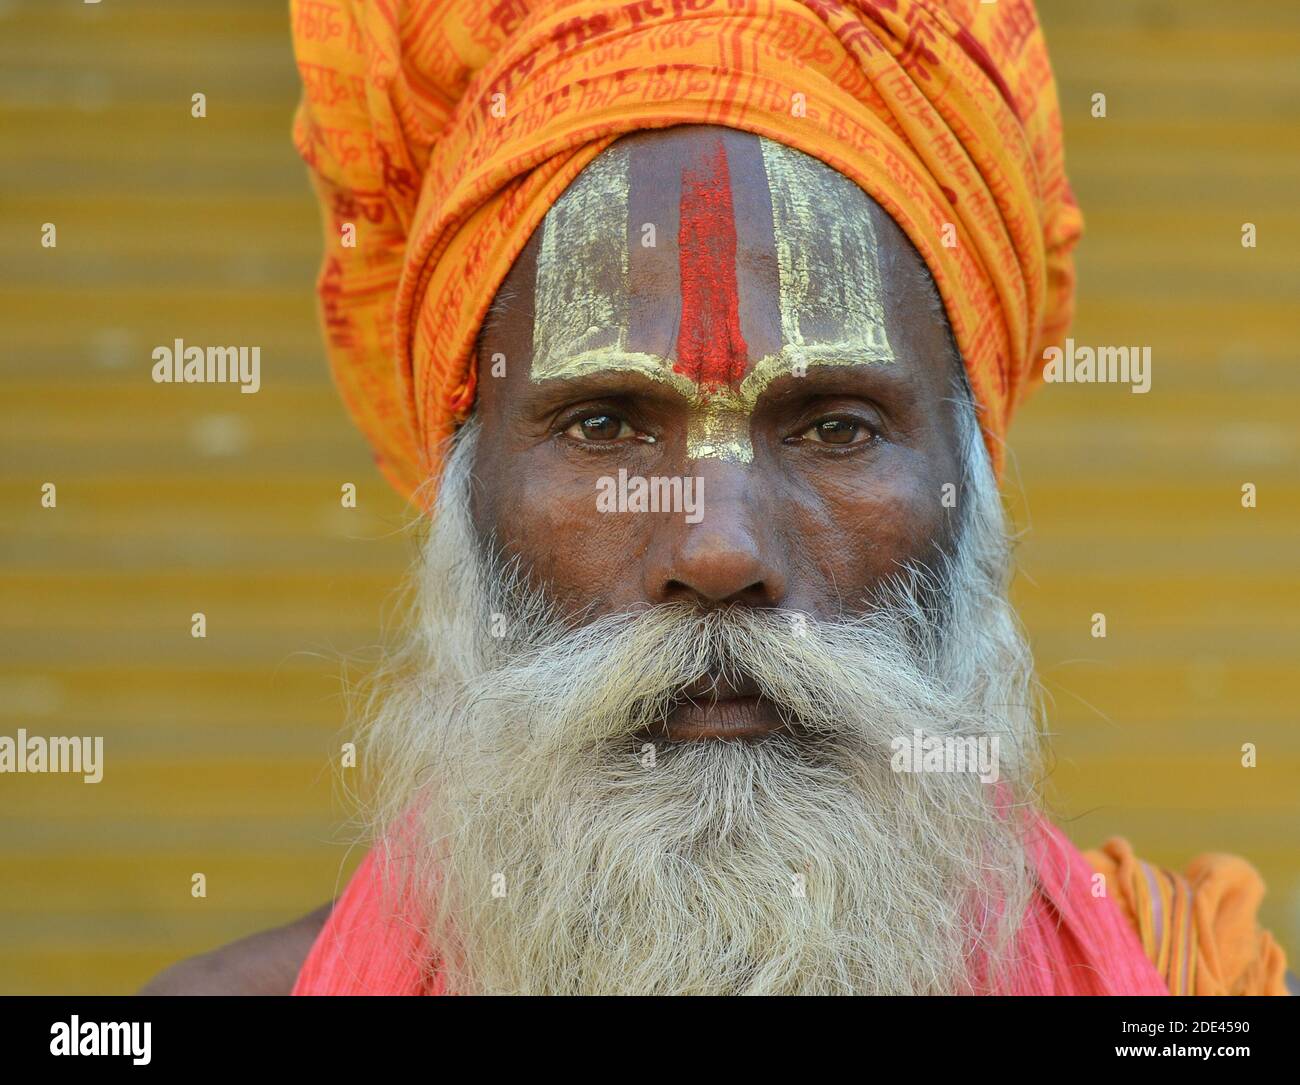 Stern looking serious Indian Vaishnavite Hindu sadhu with painted urdhva pundra on his forehead wears an orange turban and stares at the camera. Stock Photo